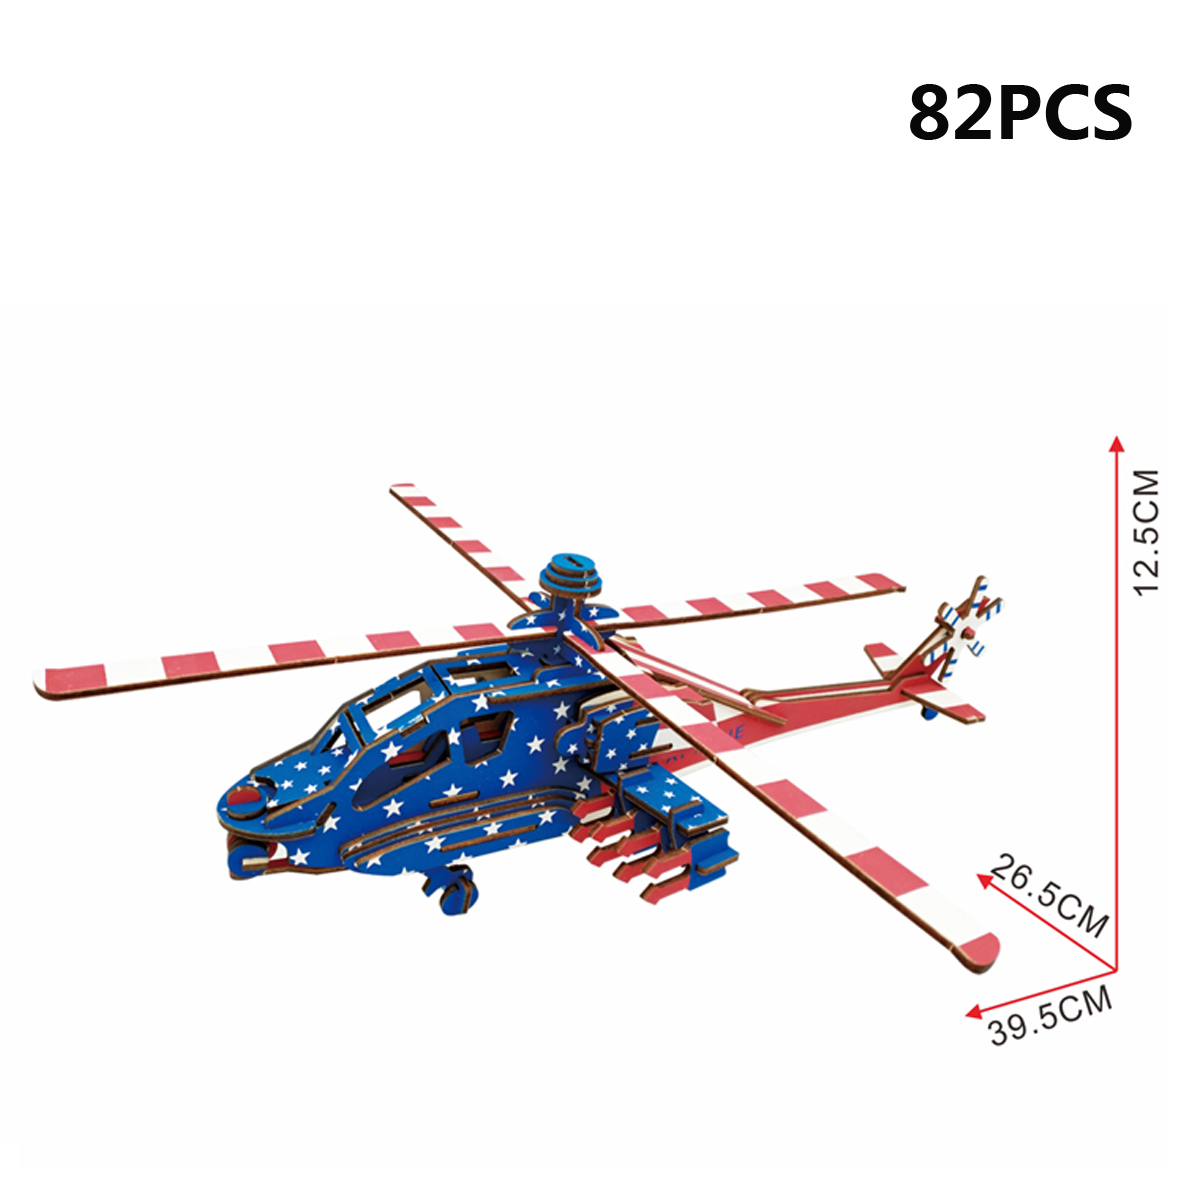 3D-Woodcraft-Assembly-Western-Fighter-Series-Kit-Jigsaw-Puzzle-Decoration-Toy-Model-for-Kids-Gift-1632732-12